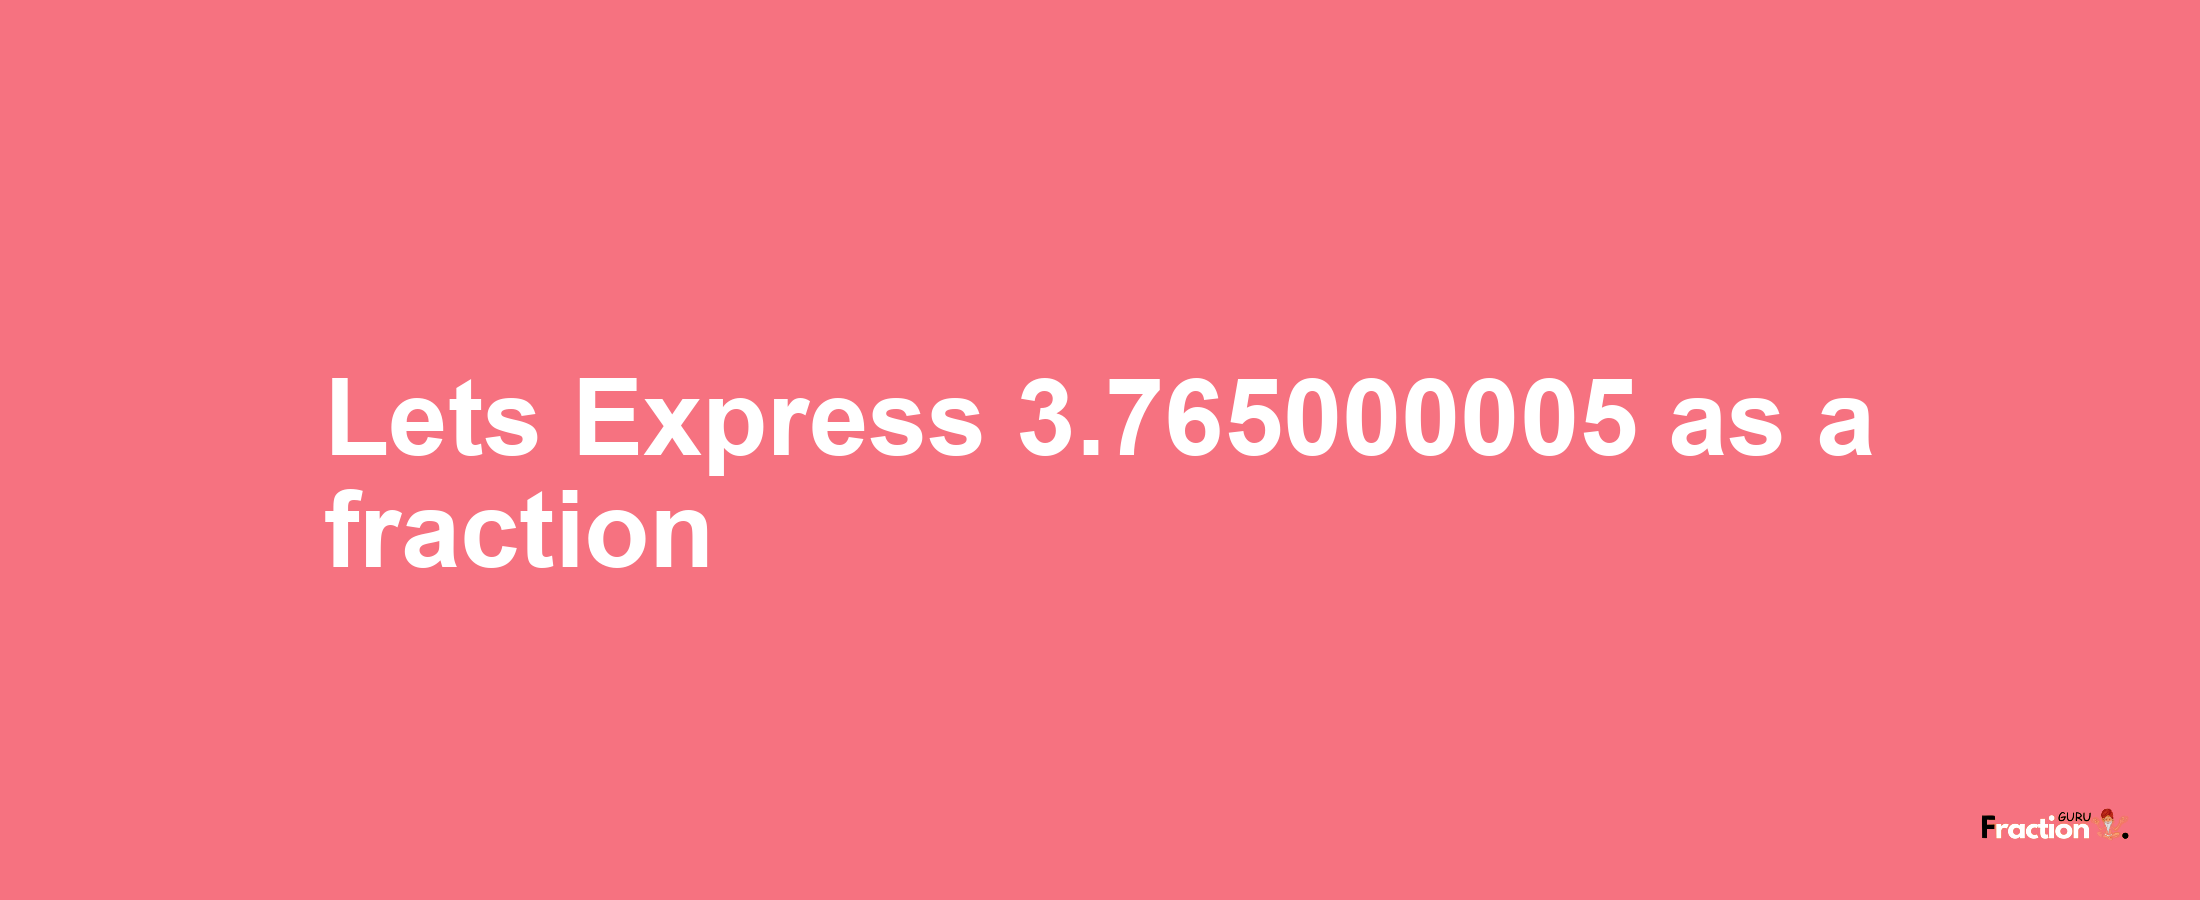 Lets Express 3.765000005 as afraction